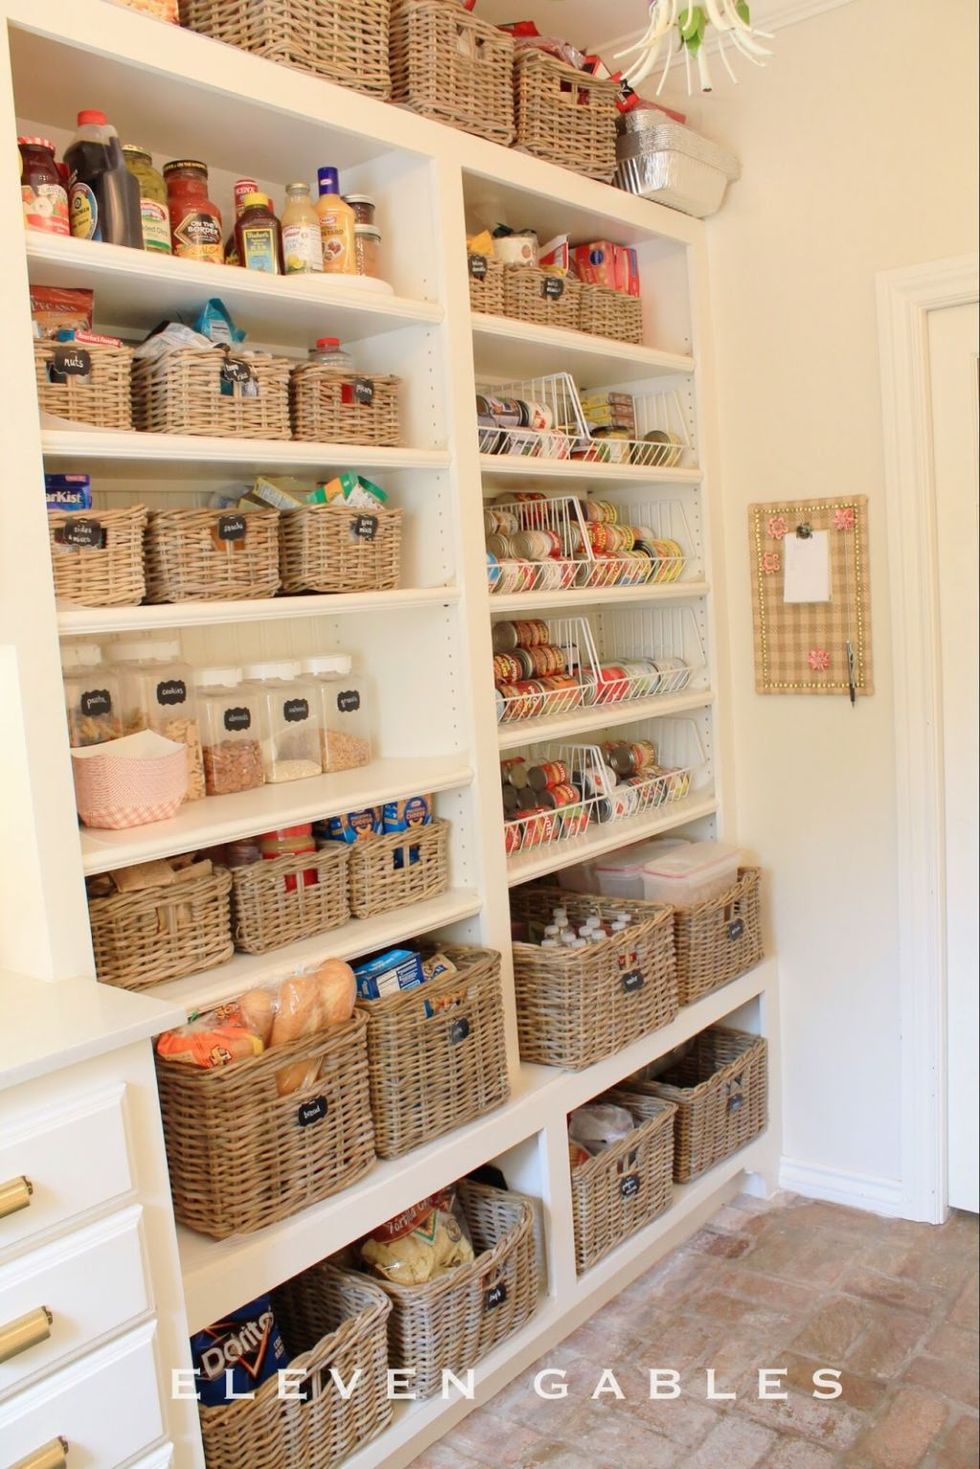 10+ Ways to Make Your Pantry Picture-Perfect| Organization, Organization Ideas for the Home, Pantry Organization, Pantry Ideas, pantry Organization Ideas, Pantry Design, Pantry Decor, Pantry #Organization #PantryOrganization #PantryOrganizationIdeas #OrganizationIdeasfortheHome